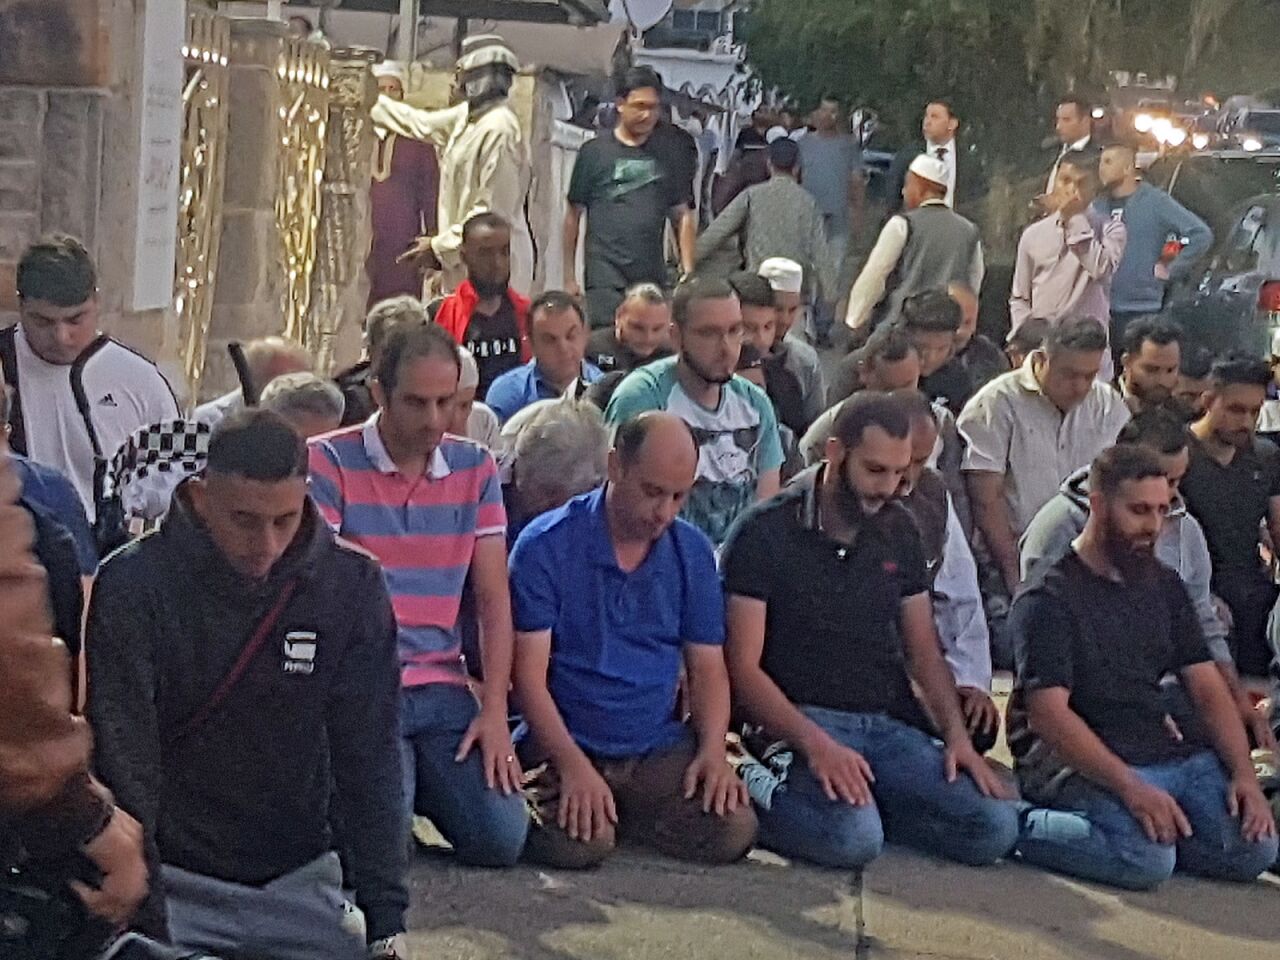 Worshipers pray for victims of the New Zealand shootings at a Friday evening vigil at the Lakemba Mosque in New South Wales, Australia.